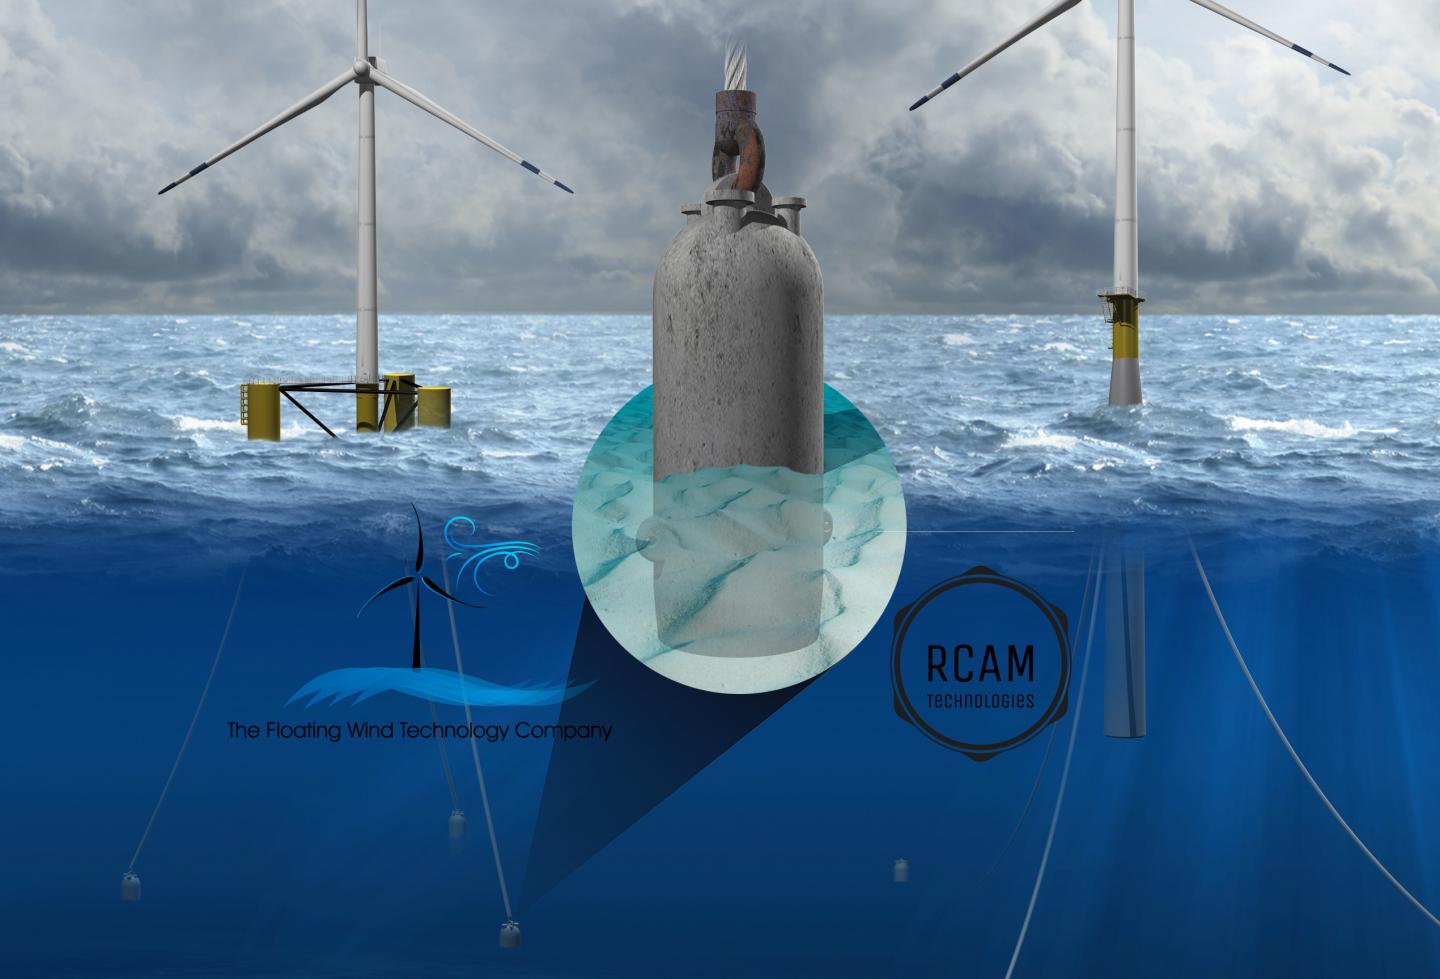 3D-Printed Concrete for Offshore Wind Energy Infrastructure